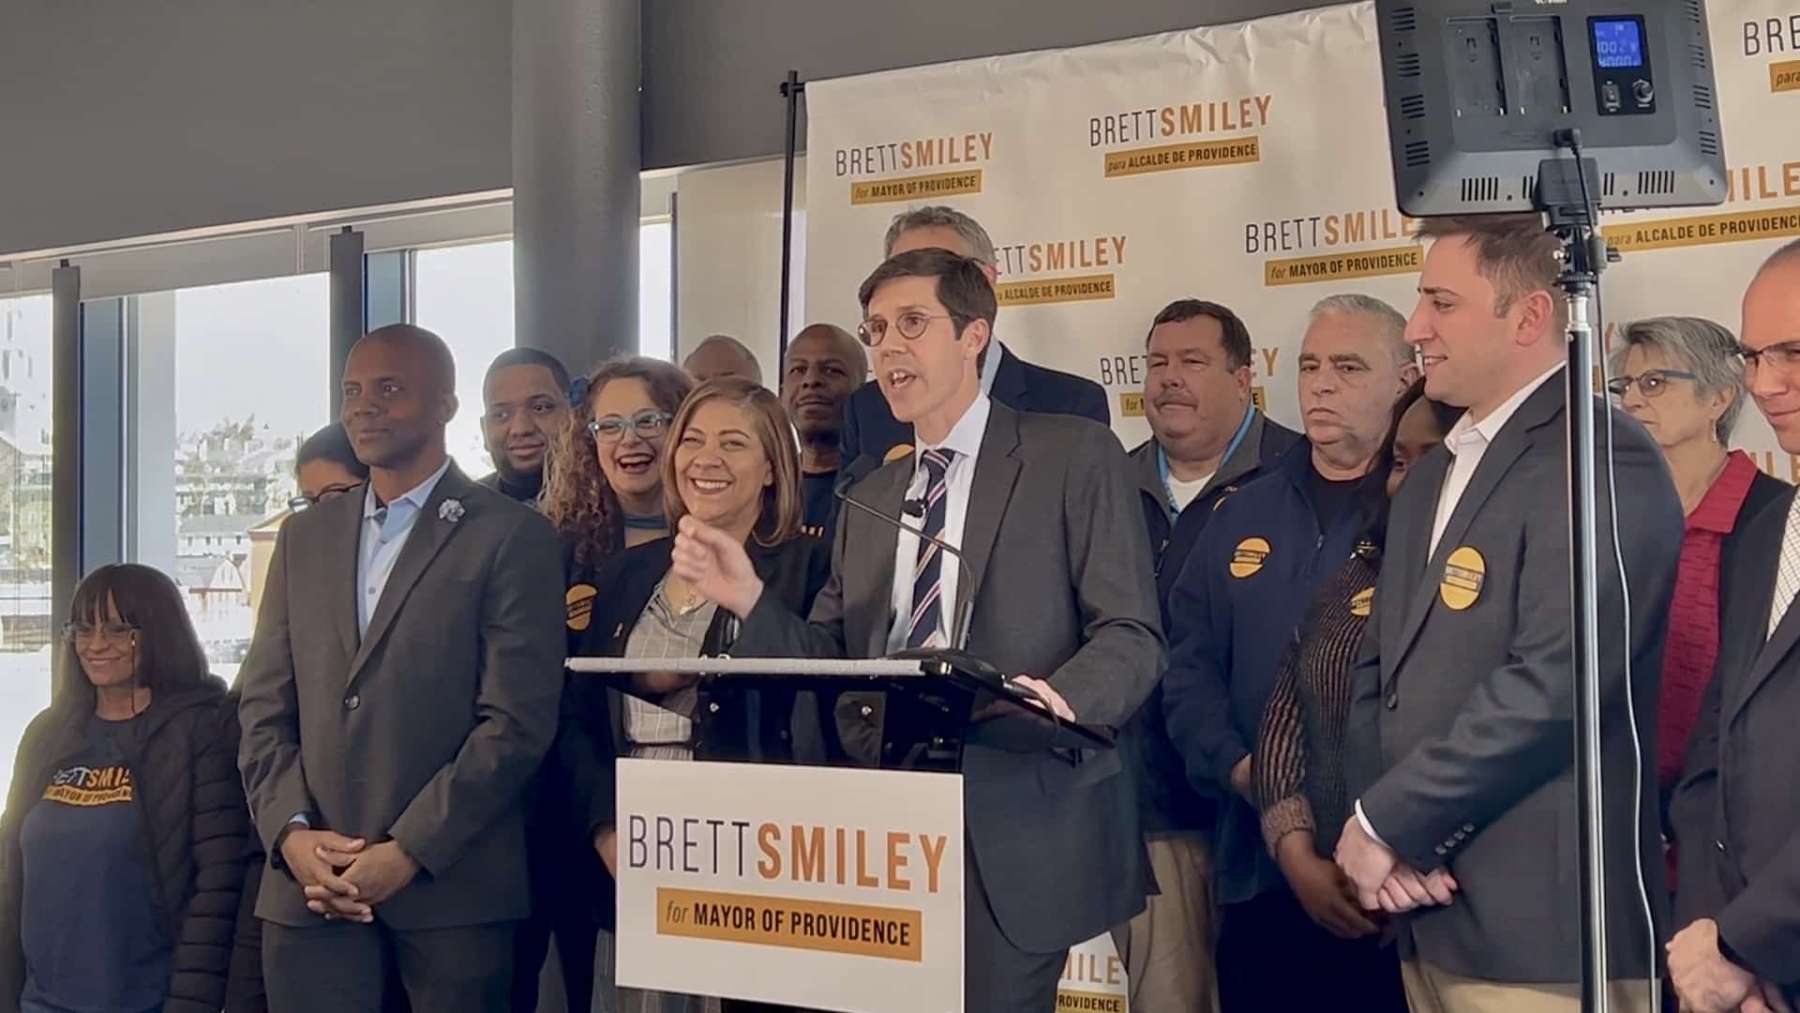 Rhode Island News: Brett Smiley officially kicks off his campaign for Mayor of Providence